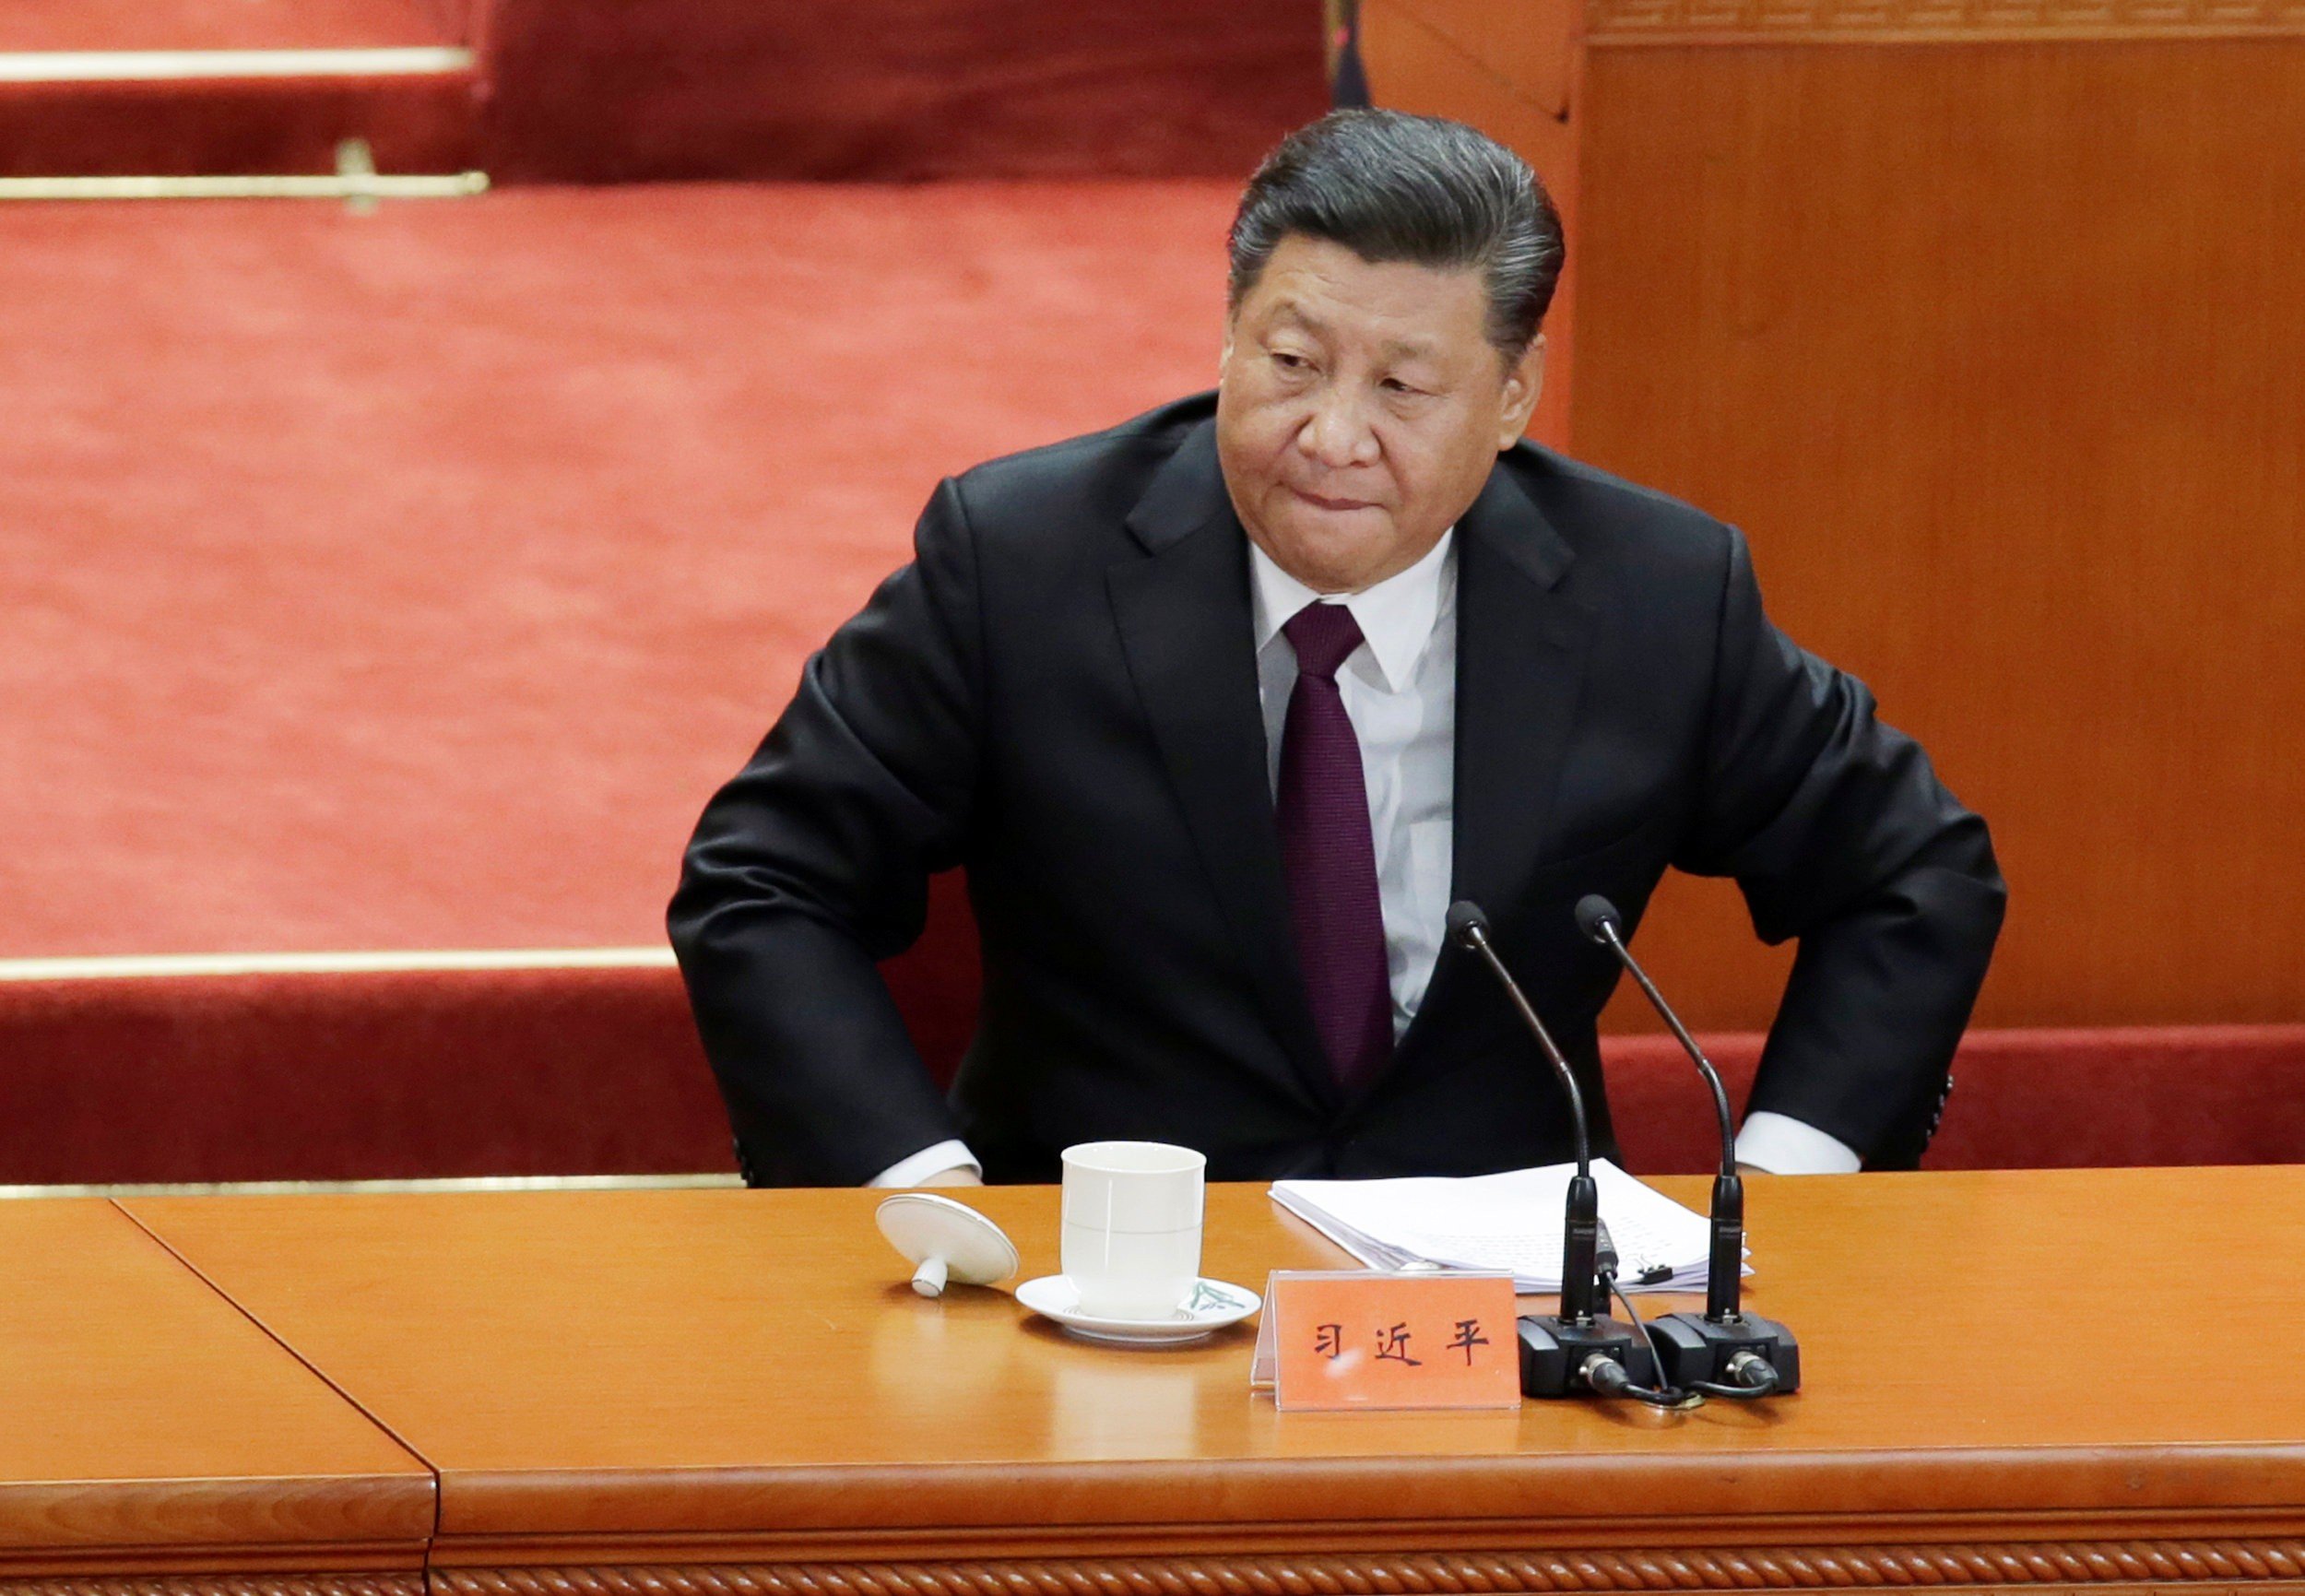 President Xi Jinping prepares to leave at the end of the event in Beijing marking the 40th anniversary of China’s reform and opening up. Photo: Reuters